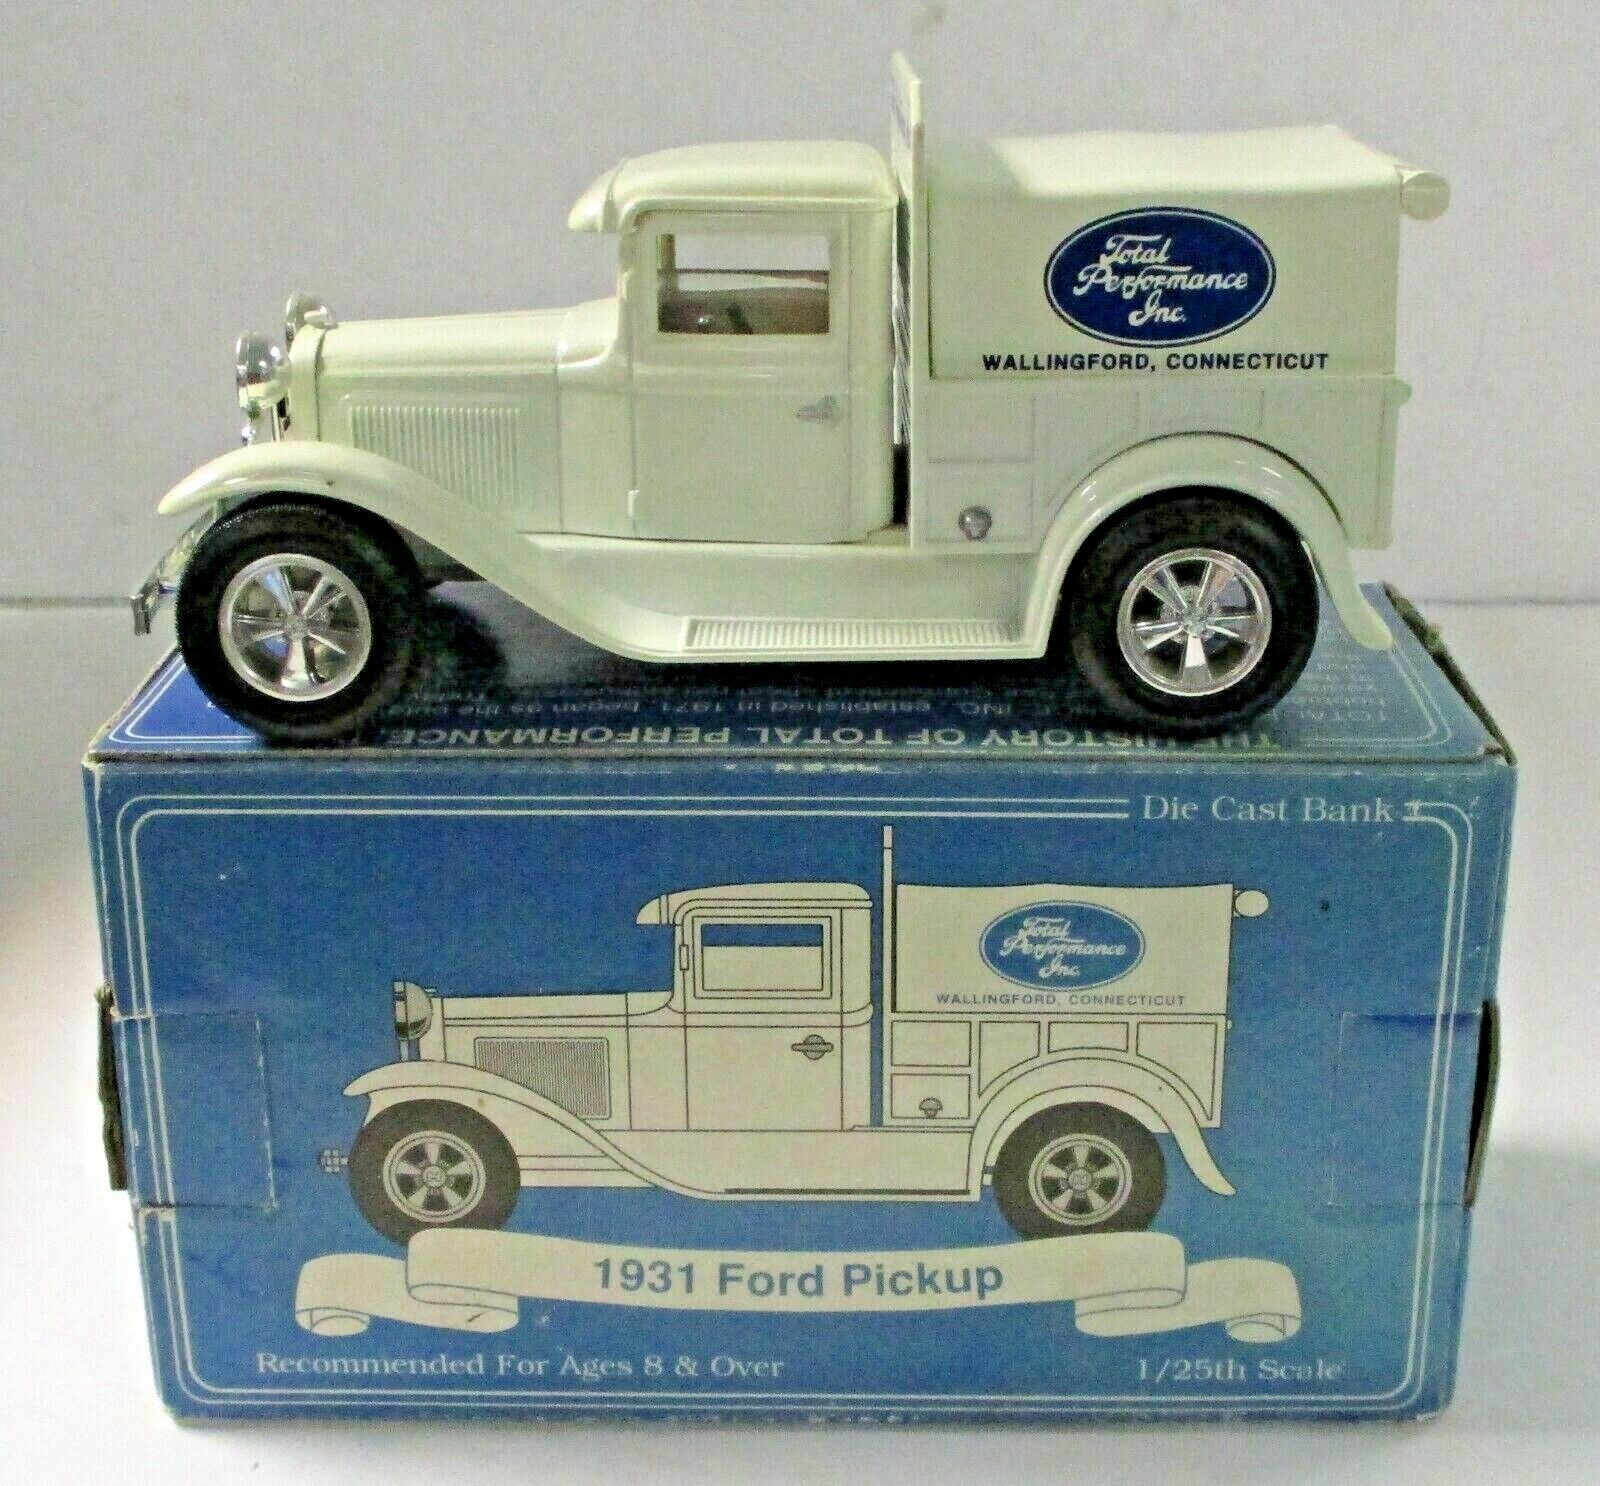 Eastwood Company Diecast 1931 Ford Pickup - Total Performance - Item No. 116900